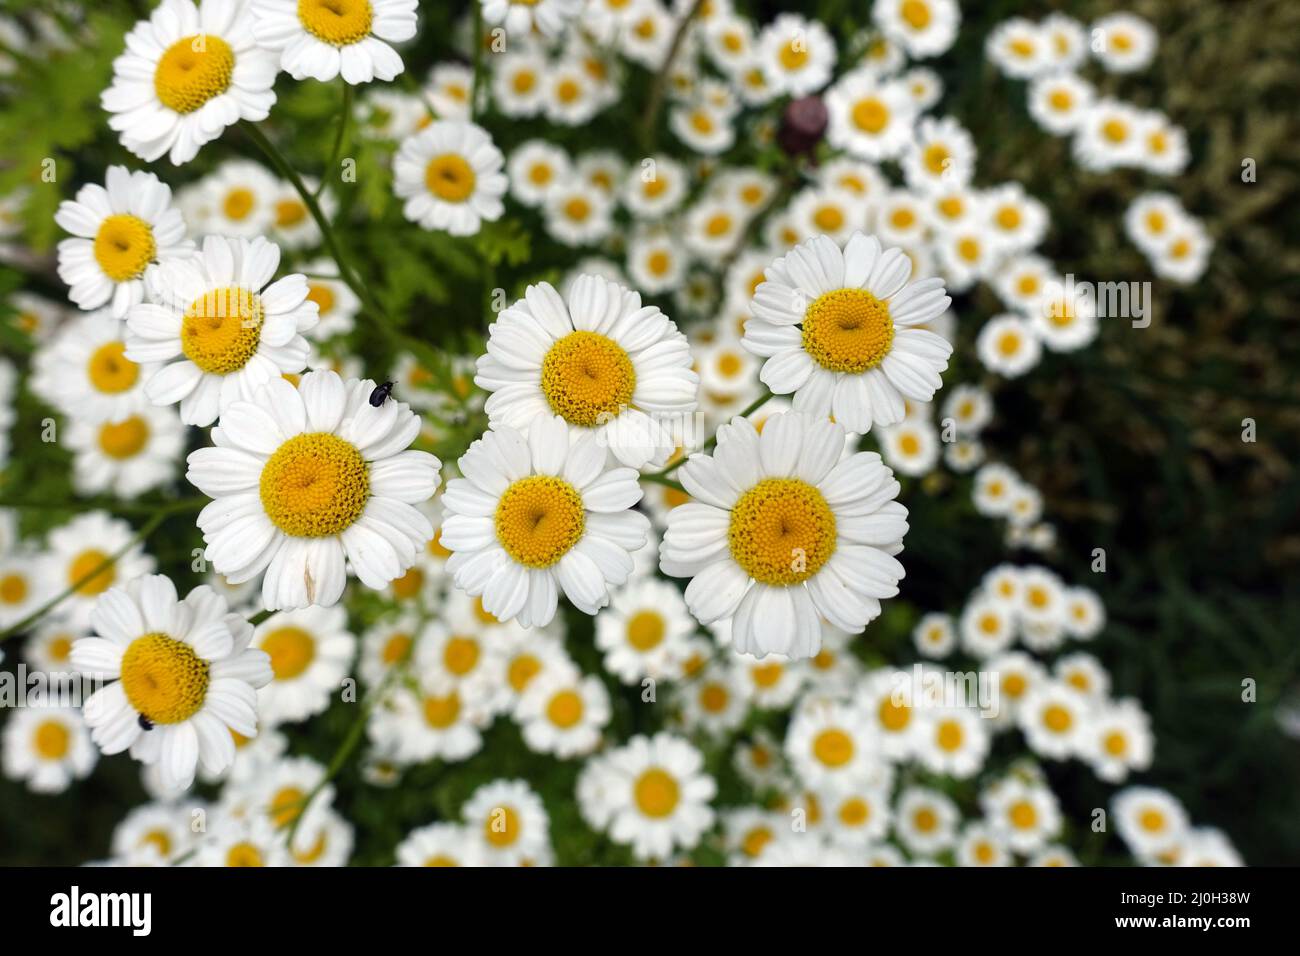 Feverfew, flower baskets in close up Stock Photo